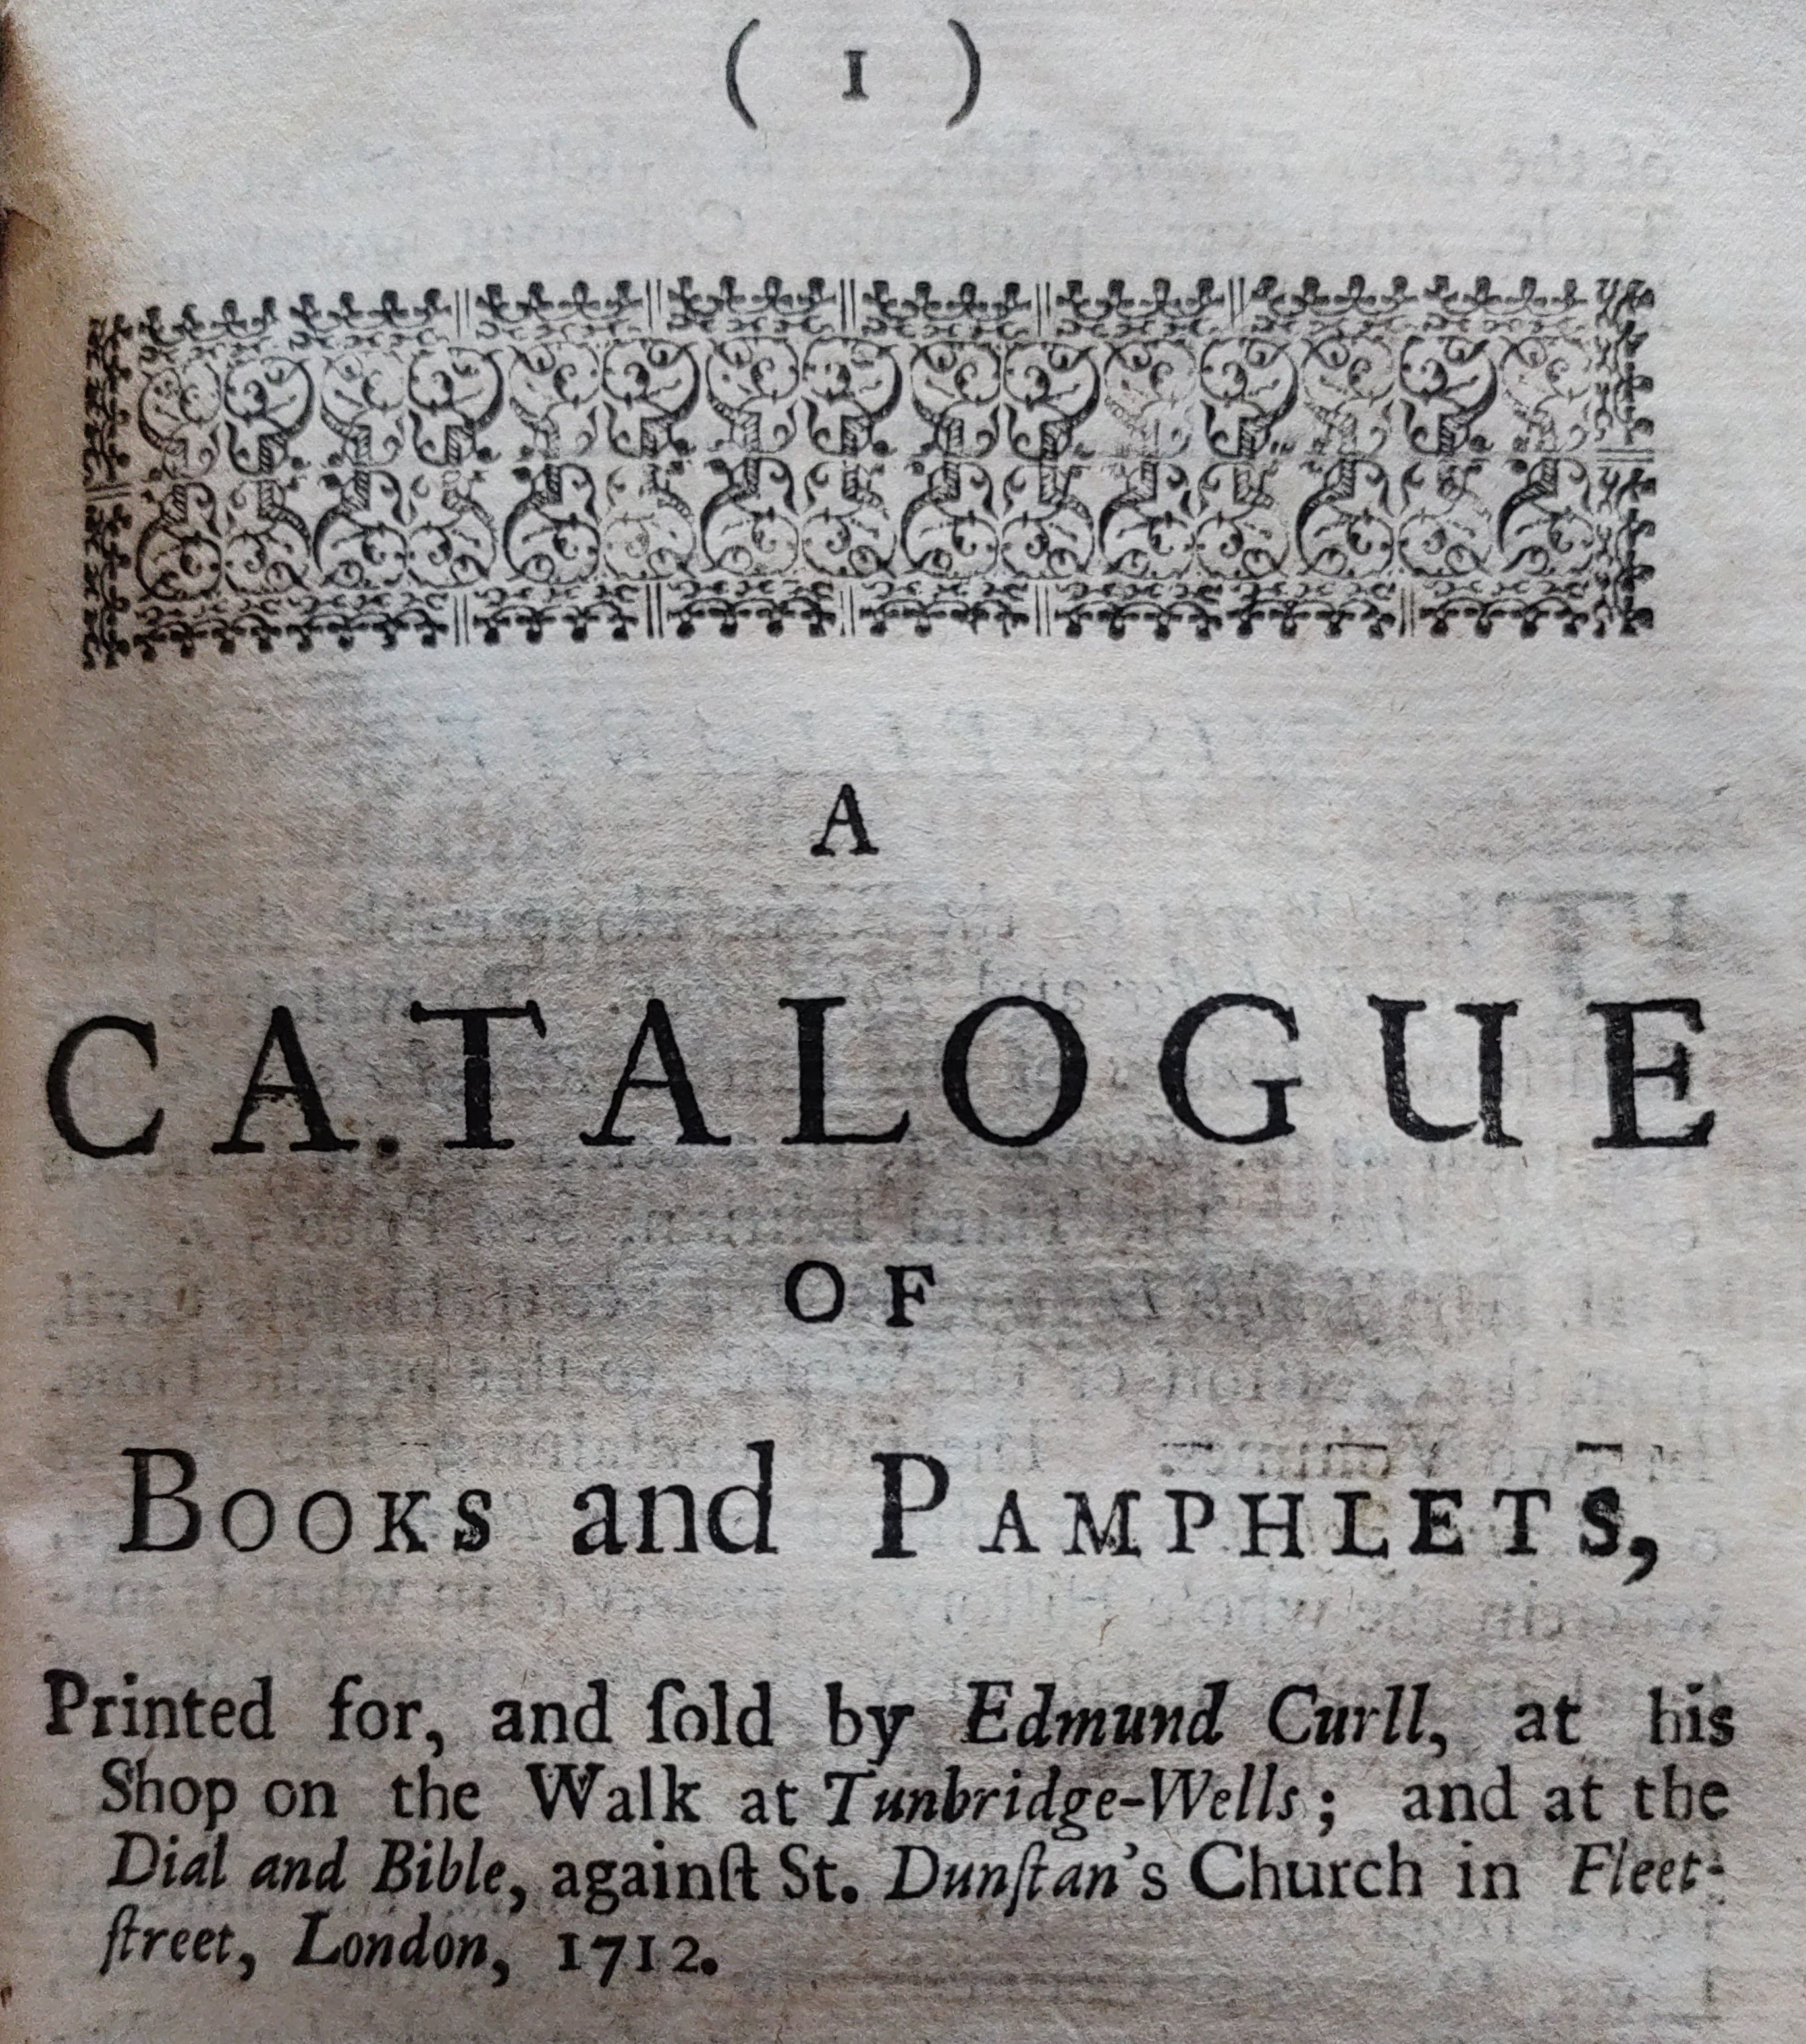 Title page of 'A Catalogue of Books and Pamphlets, Printed for, and sold by Edmund Curll'.